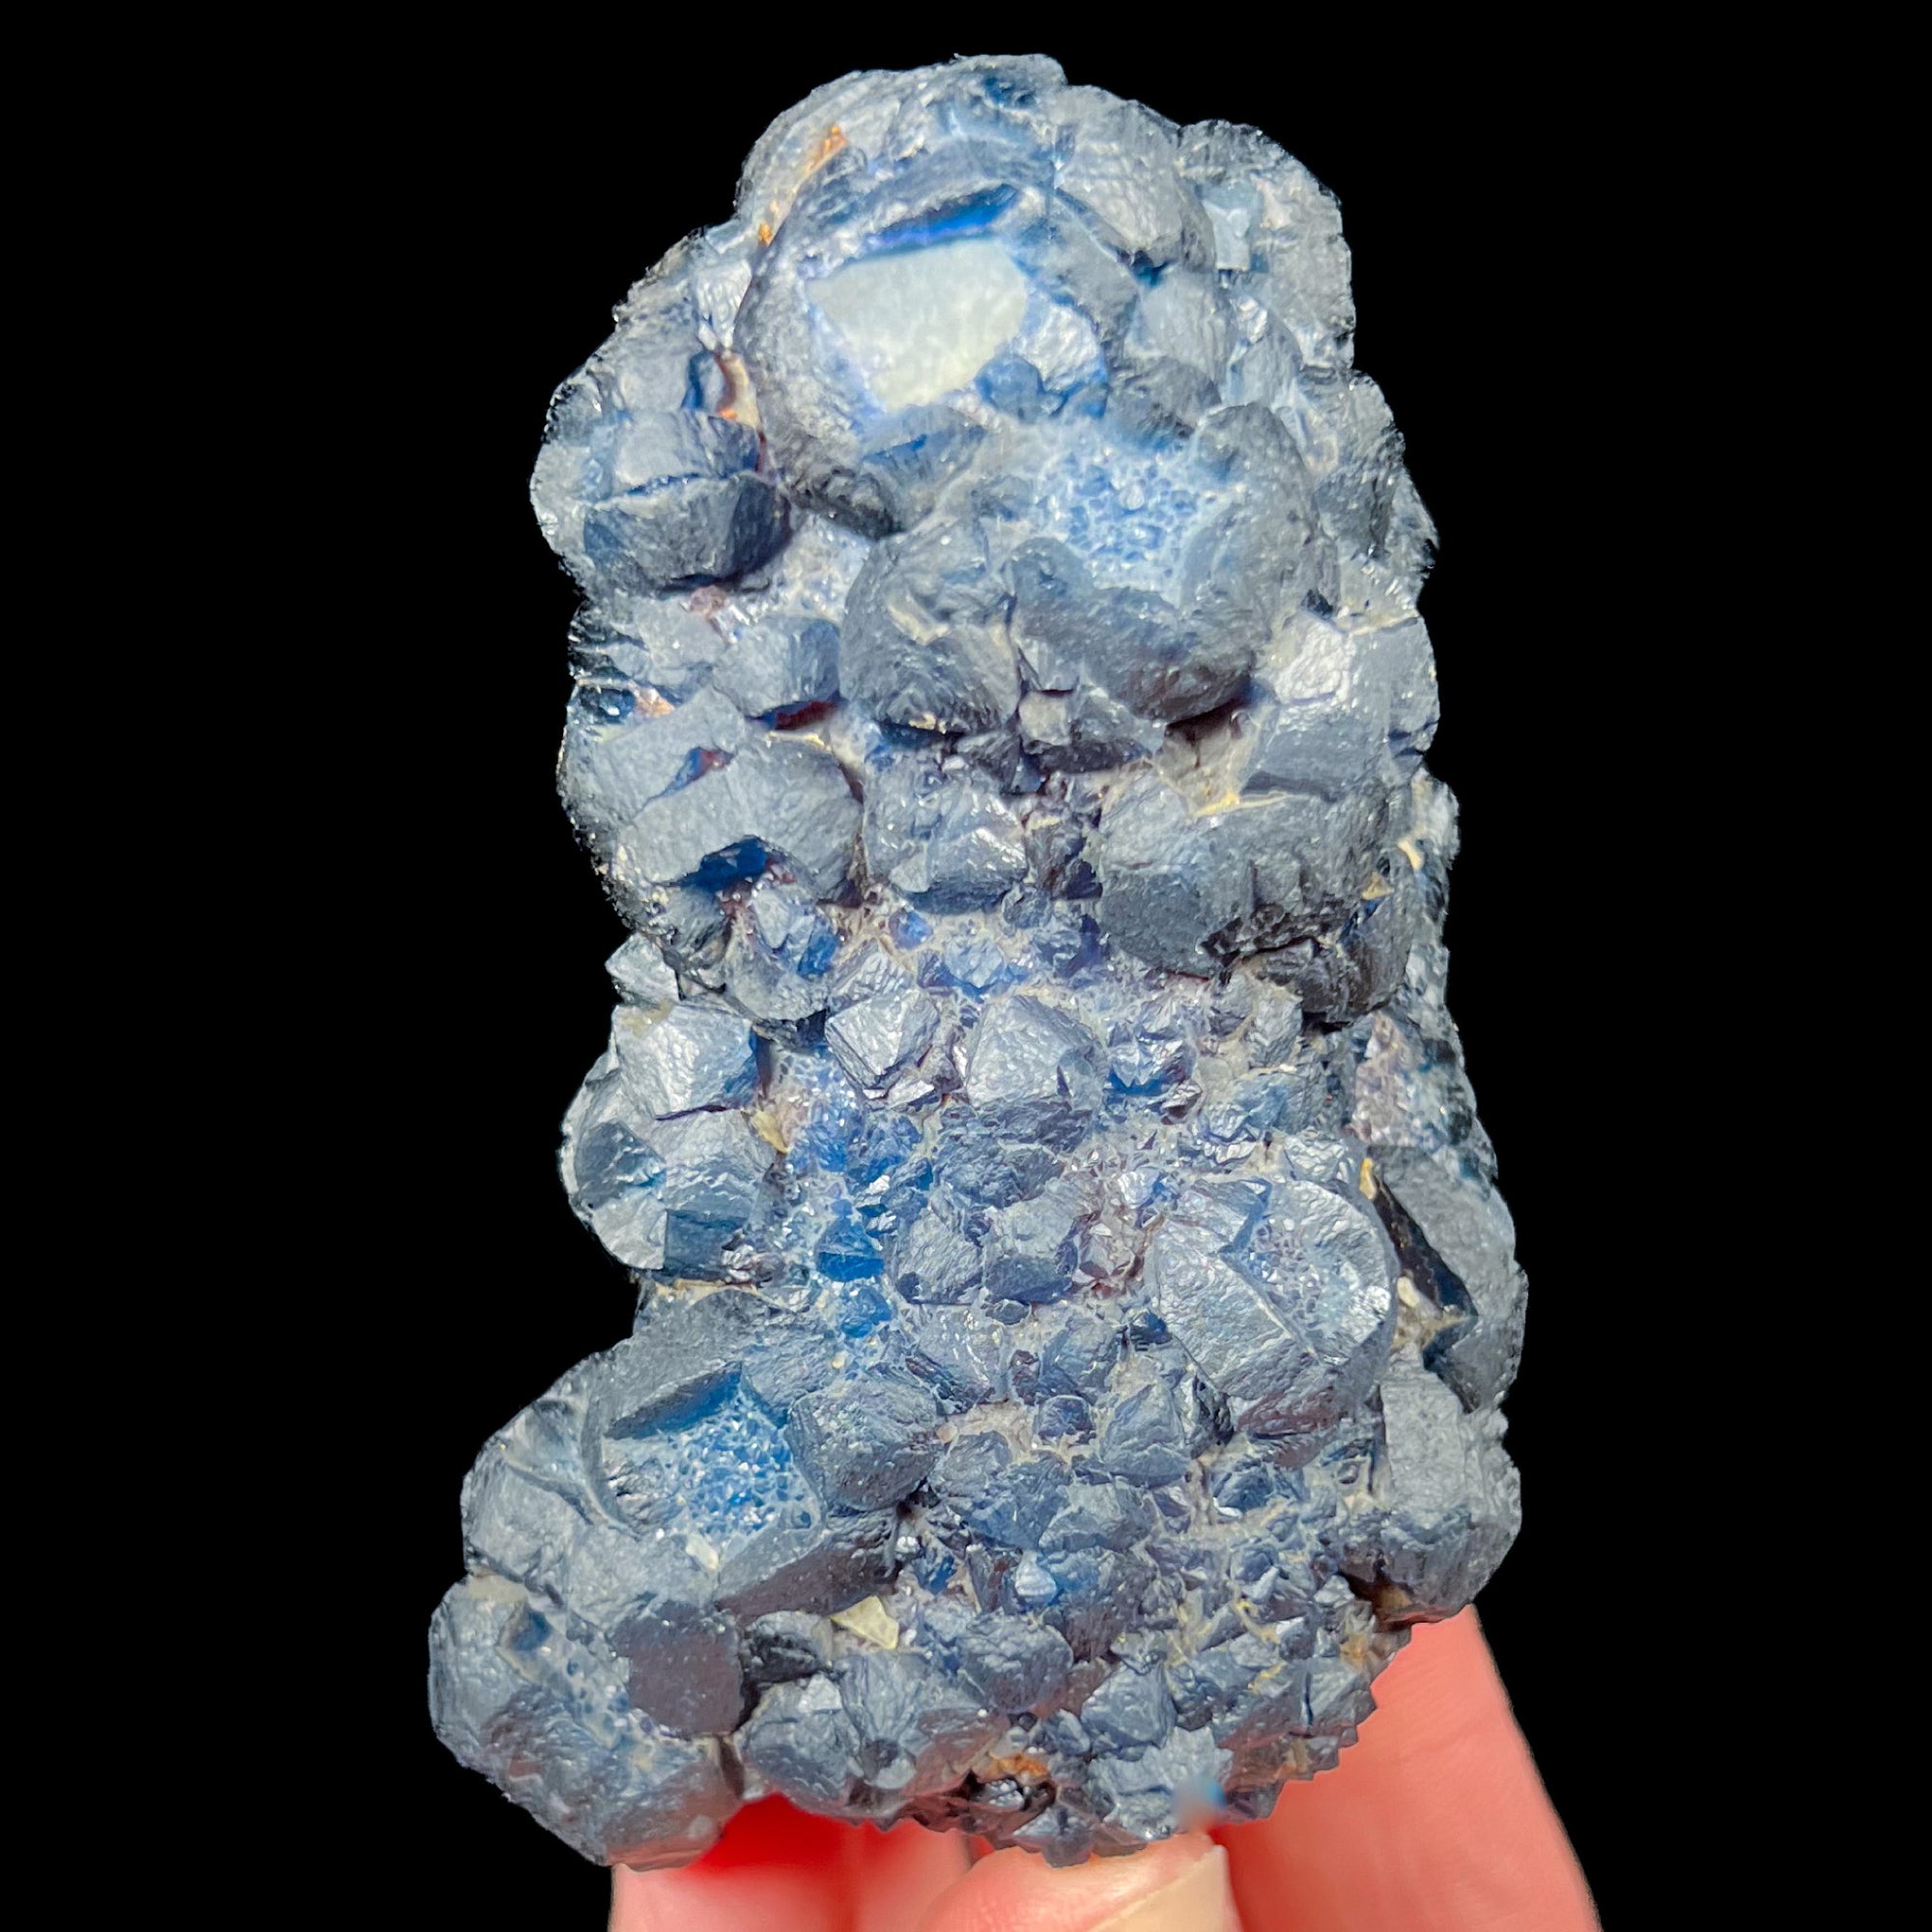 Blue Fluorite Crystals on Quartz from Inner Mongolia, China